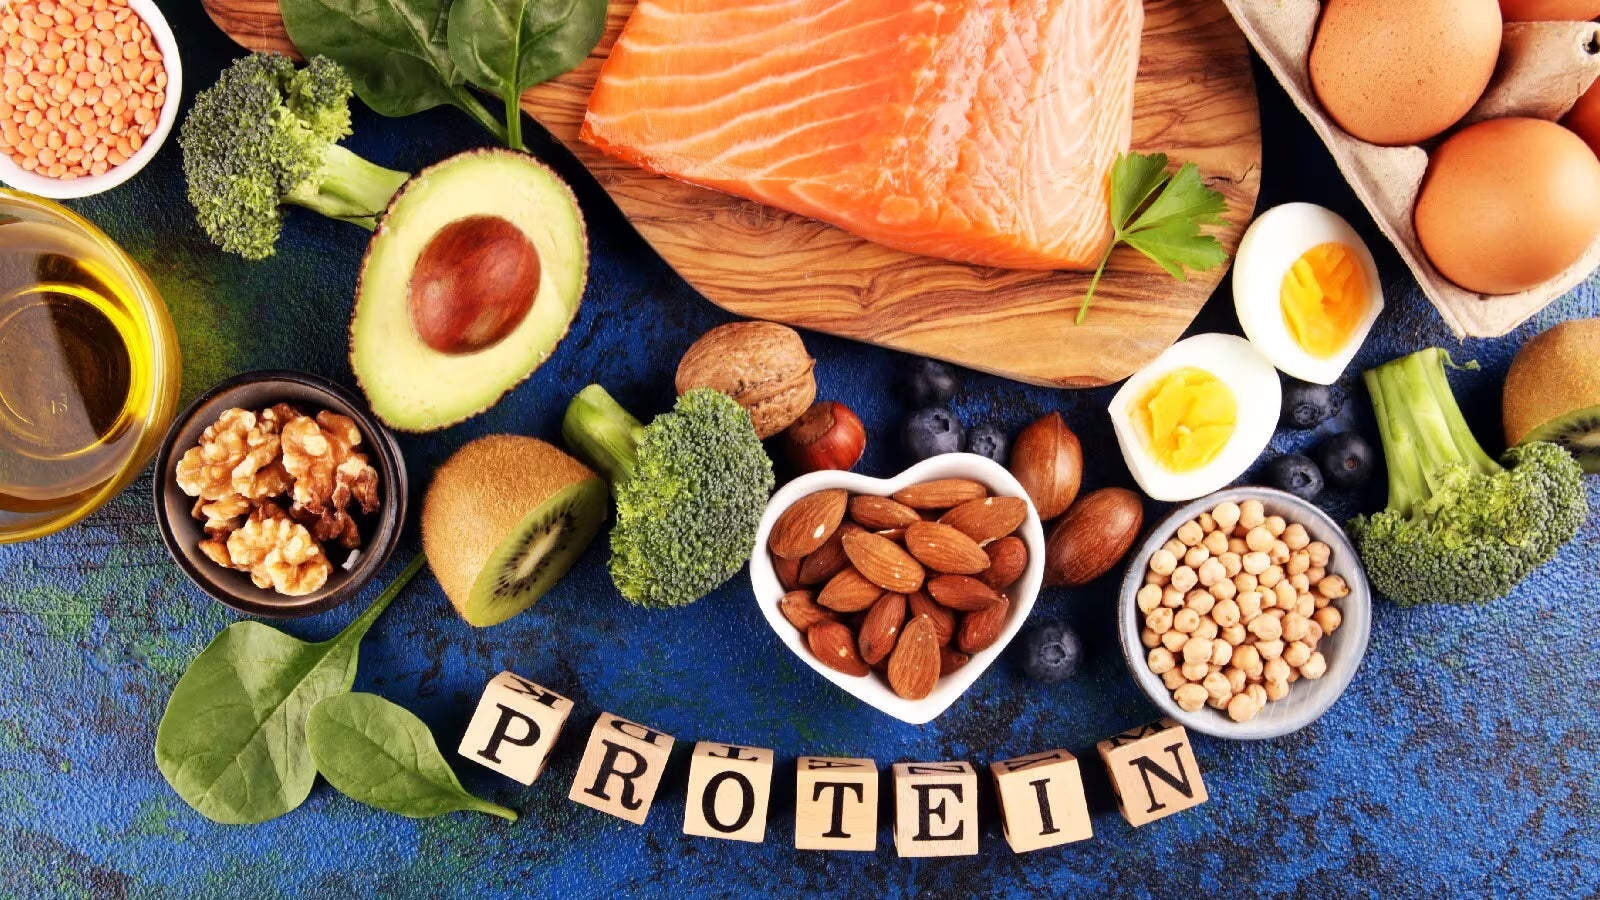 Protein: How Much Do You Really Need in Your Daily Diet?